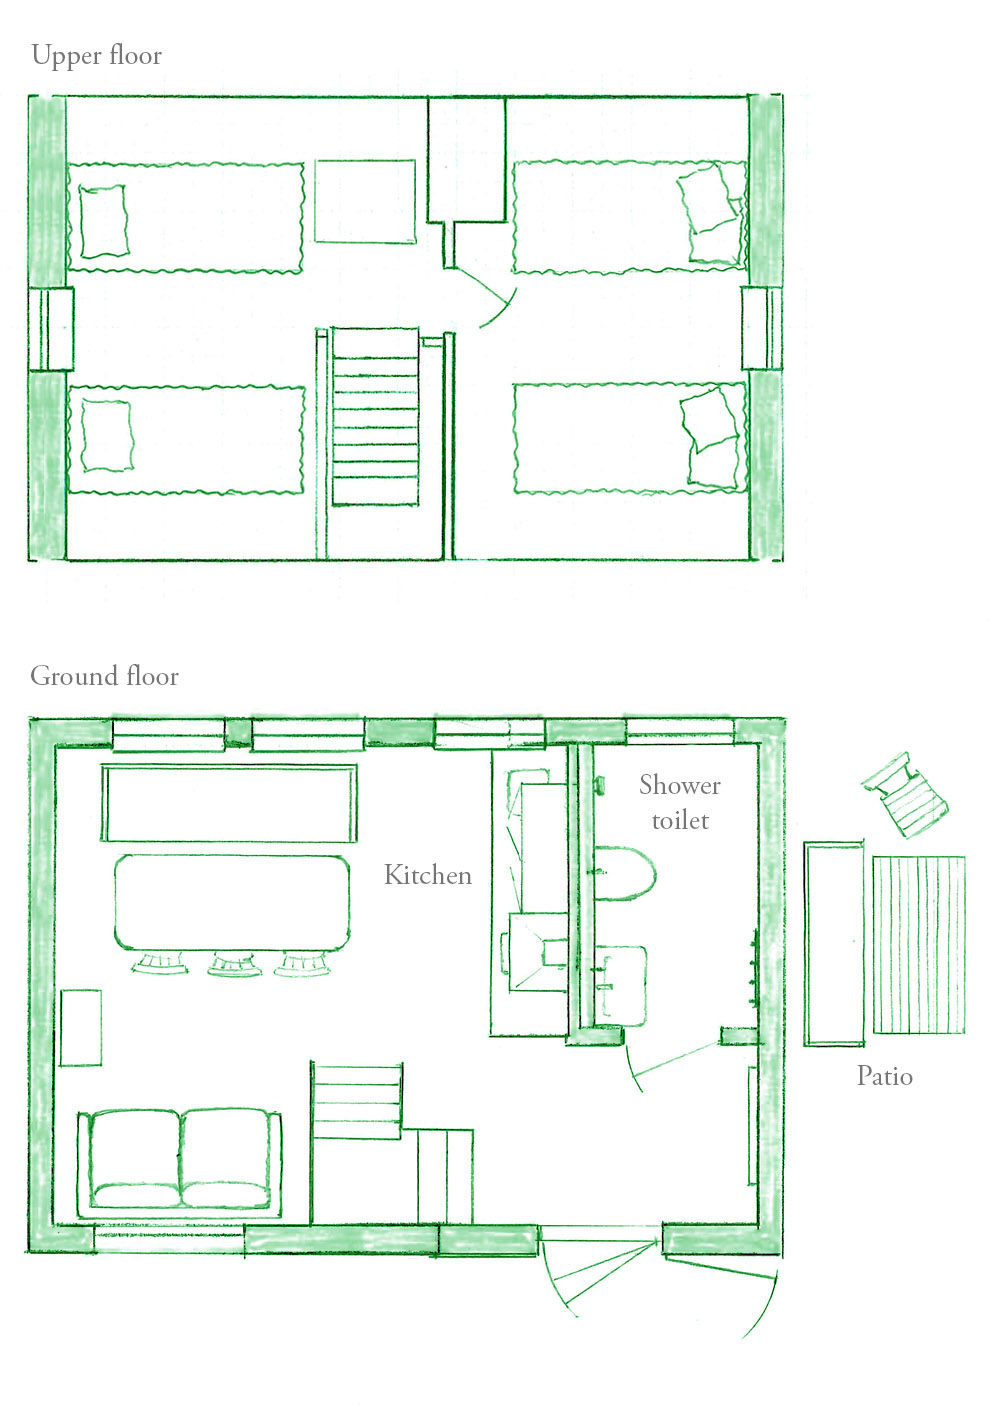 Interior planning for the cottage.